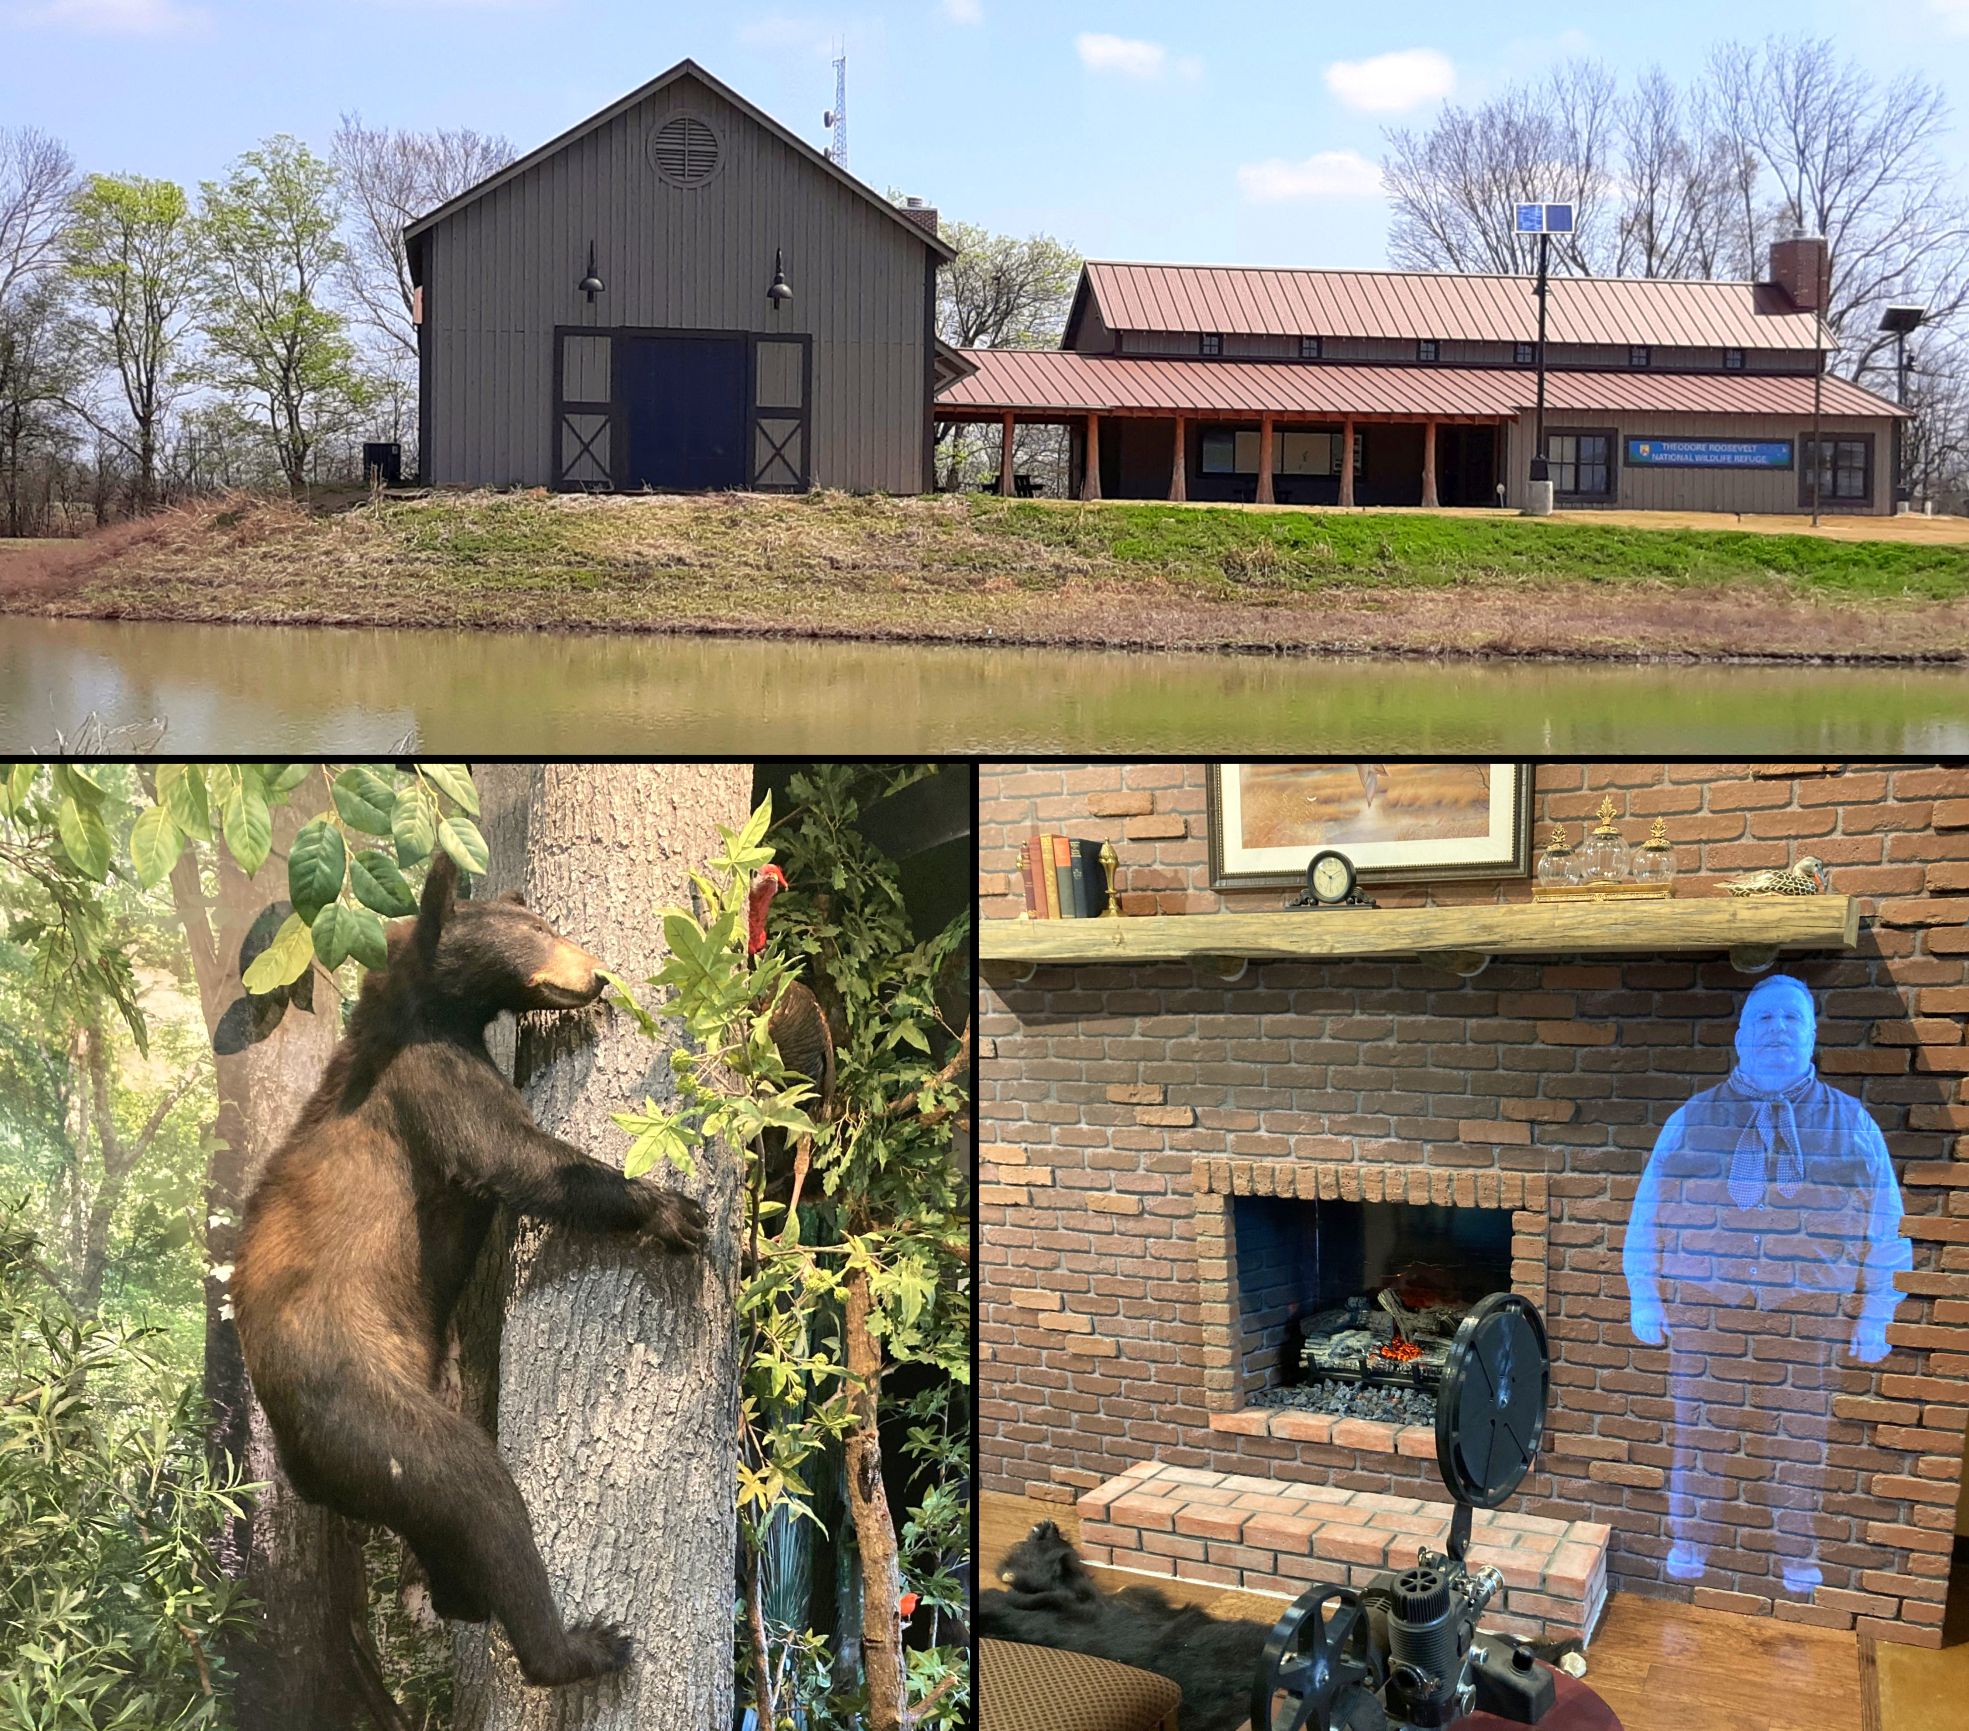 A three-image collage showing the outside of a visitor center next to a body of water, a display of a bear hugging a tree and a hologram projection of Theodore Roosevelt